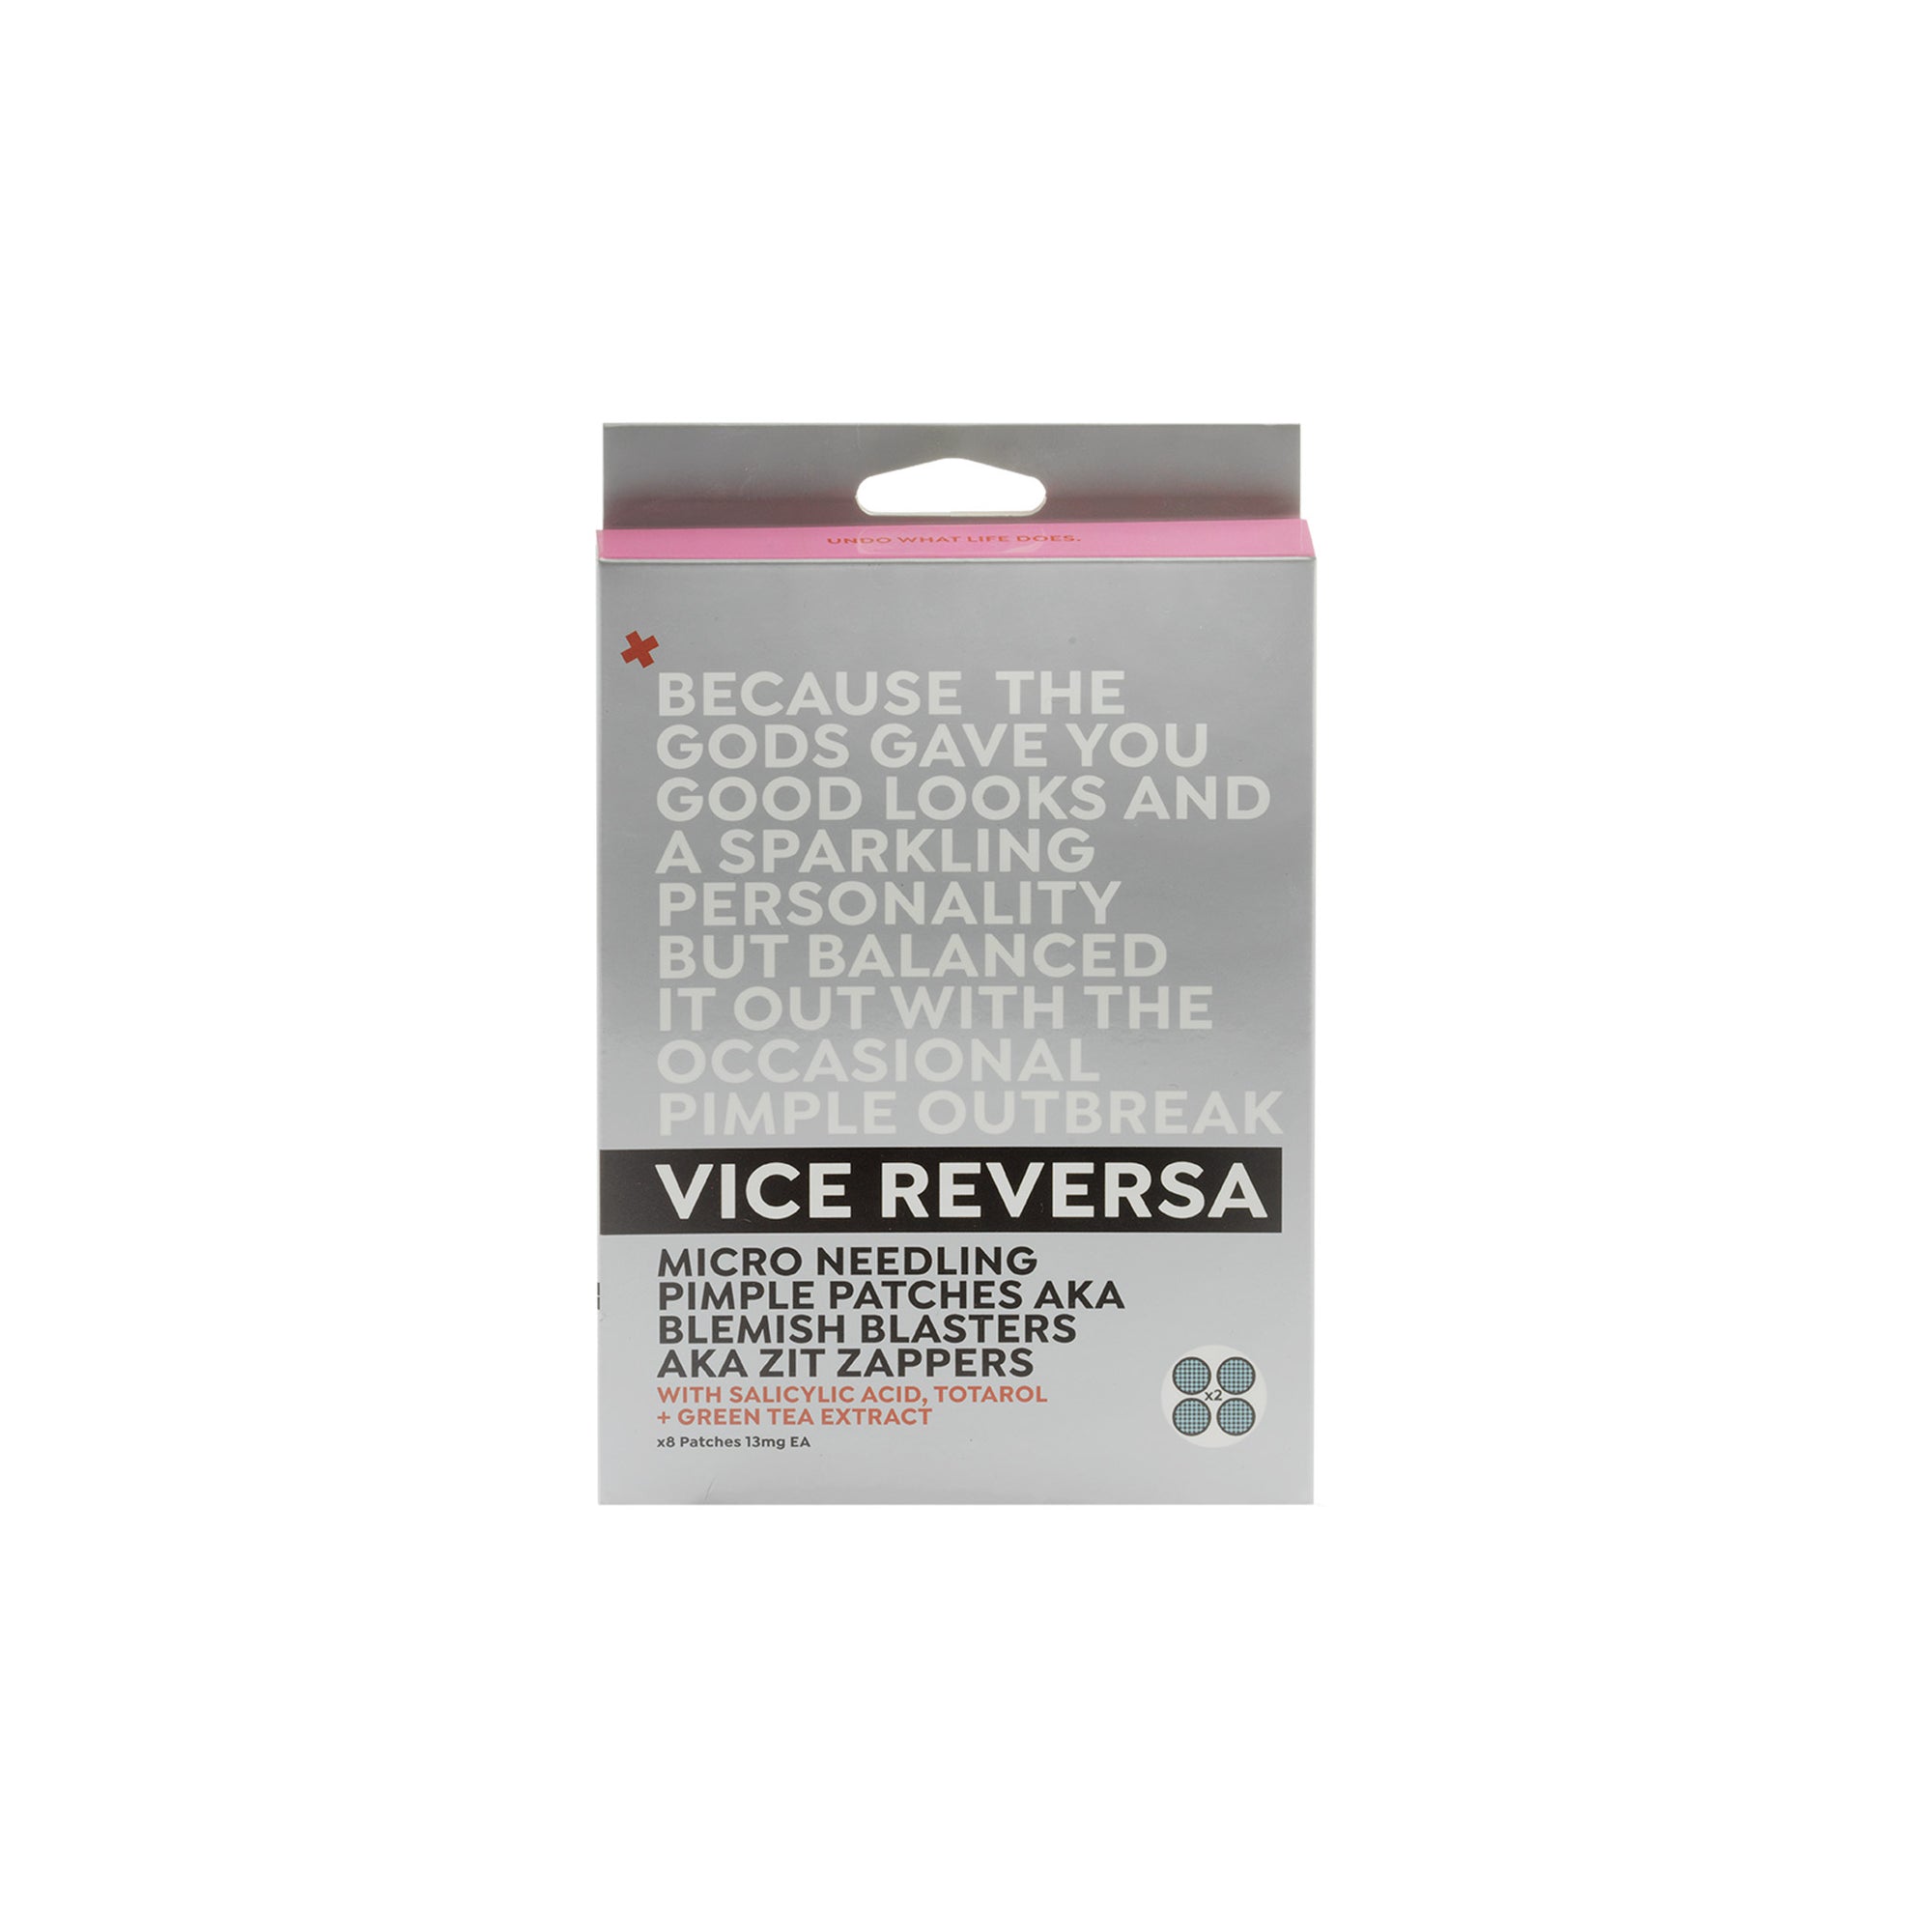 Vice Reversa Microneedle Pimple Patches